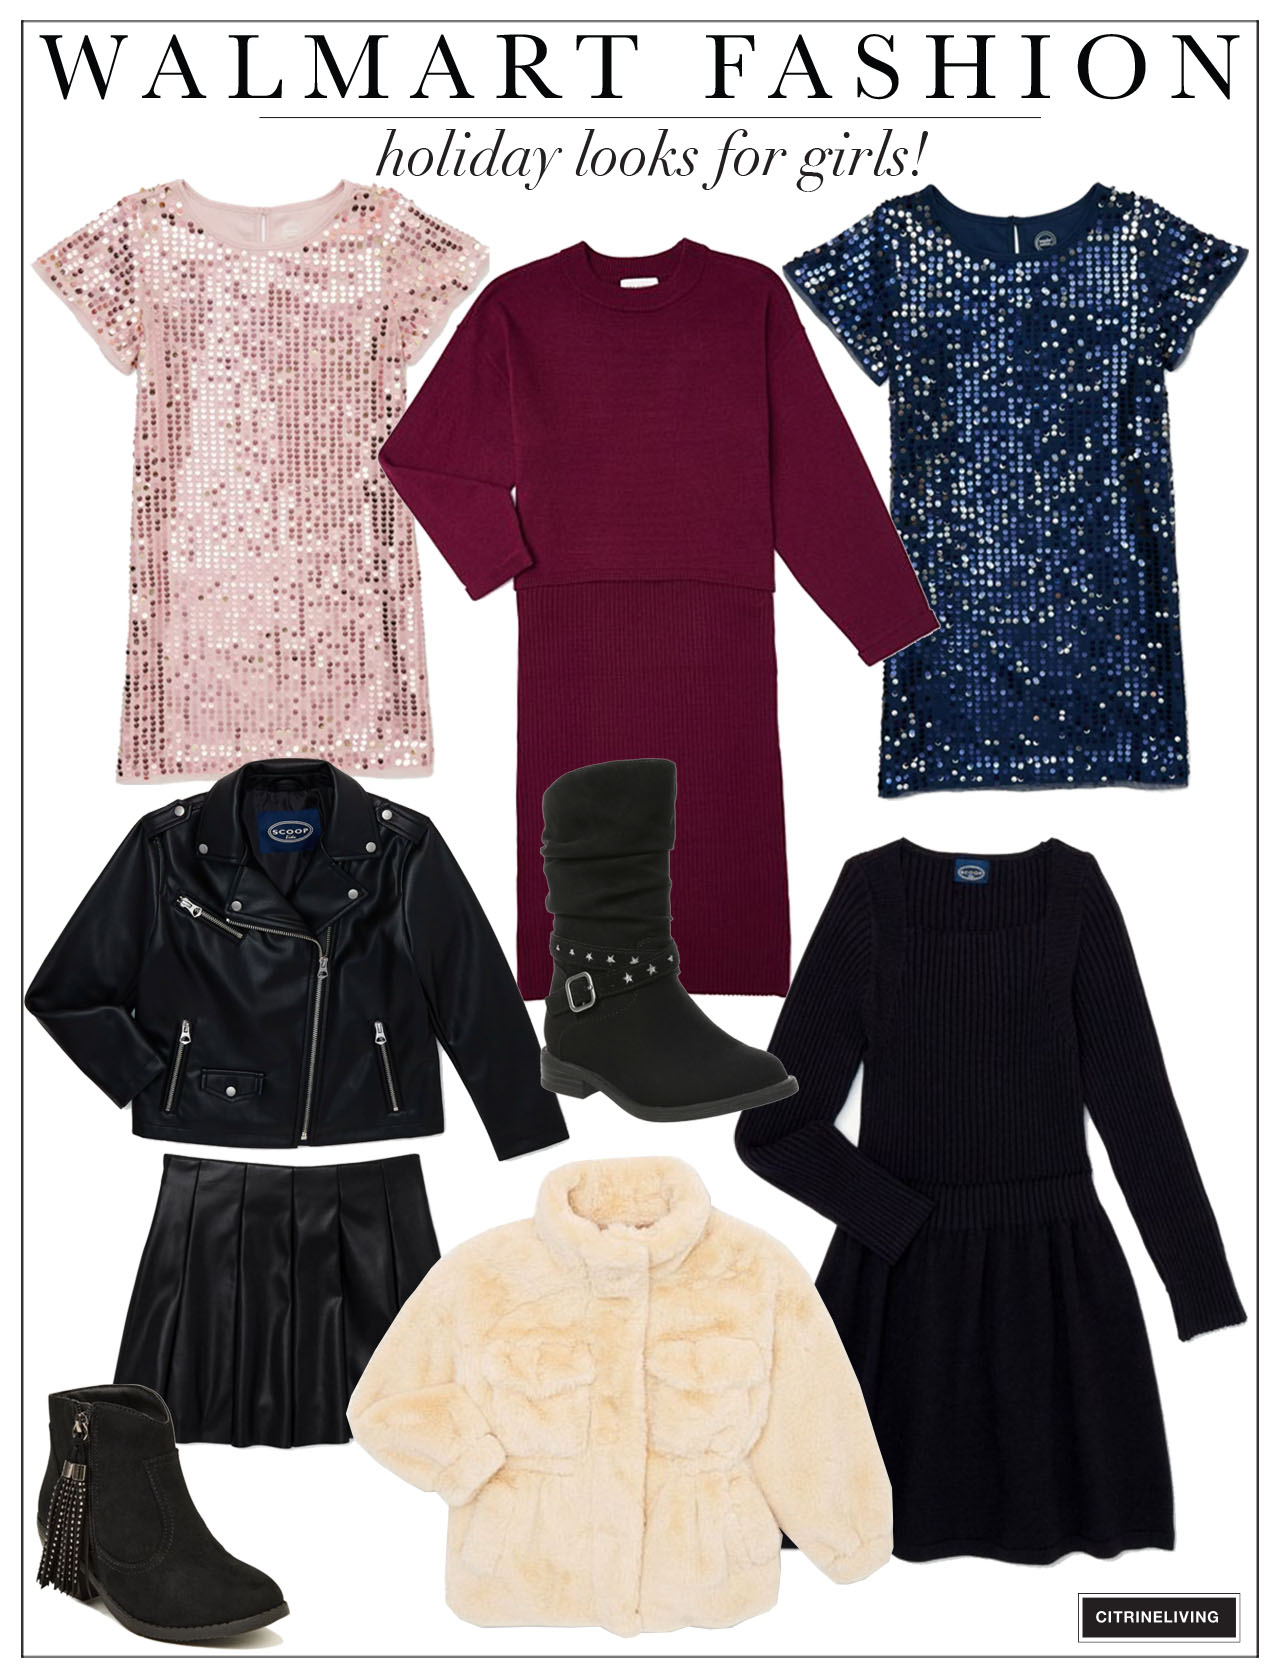 Girls fashion looks from Walmart - pink sequin short sleeve dress, navy sequin short sleeve dress, burgundy sweater dress, moto jacket, pleated faux leather skirt, faux fur jacket, black booties.